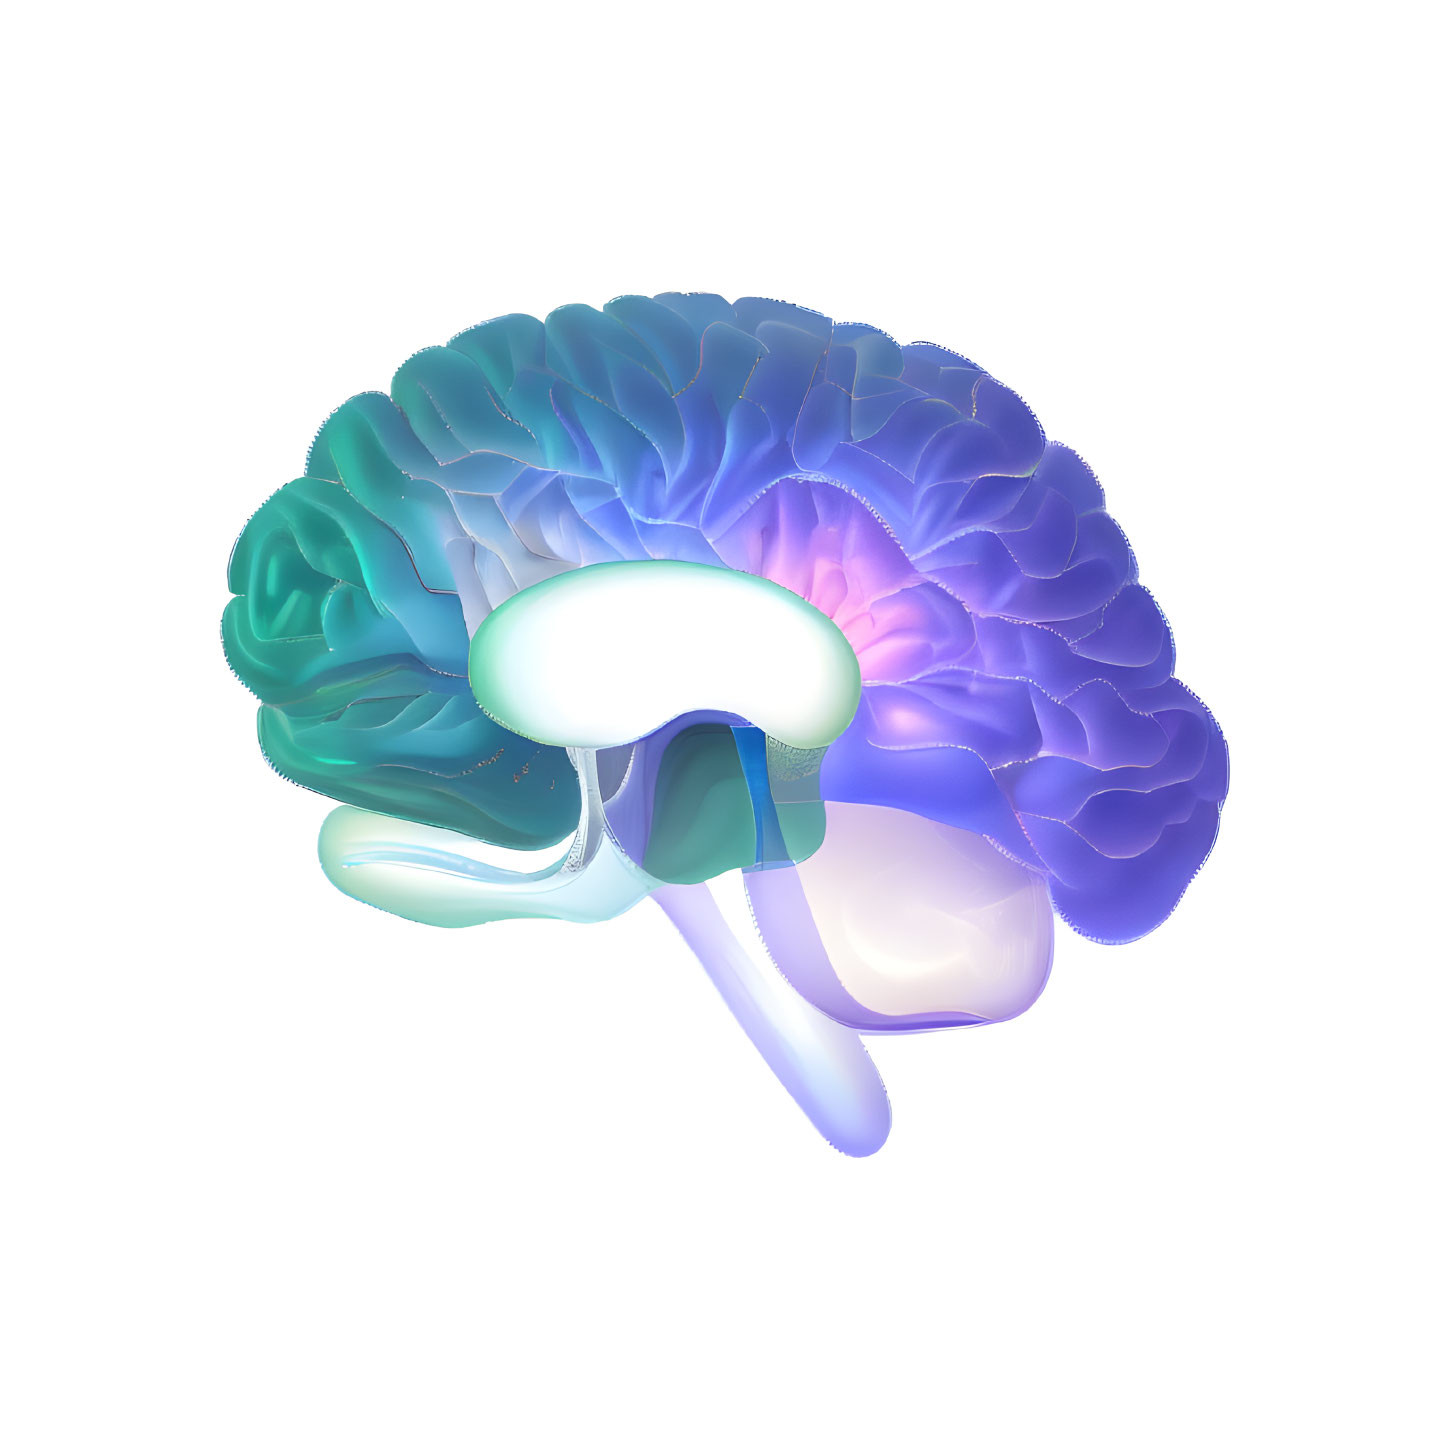 Detailed 3D human brain illustration with color-coded regions